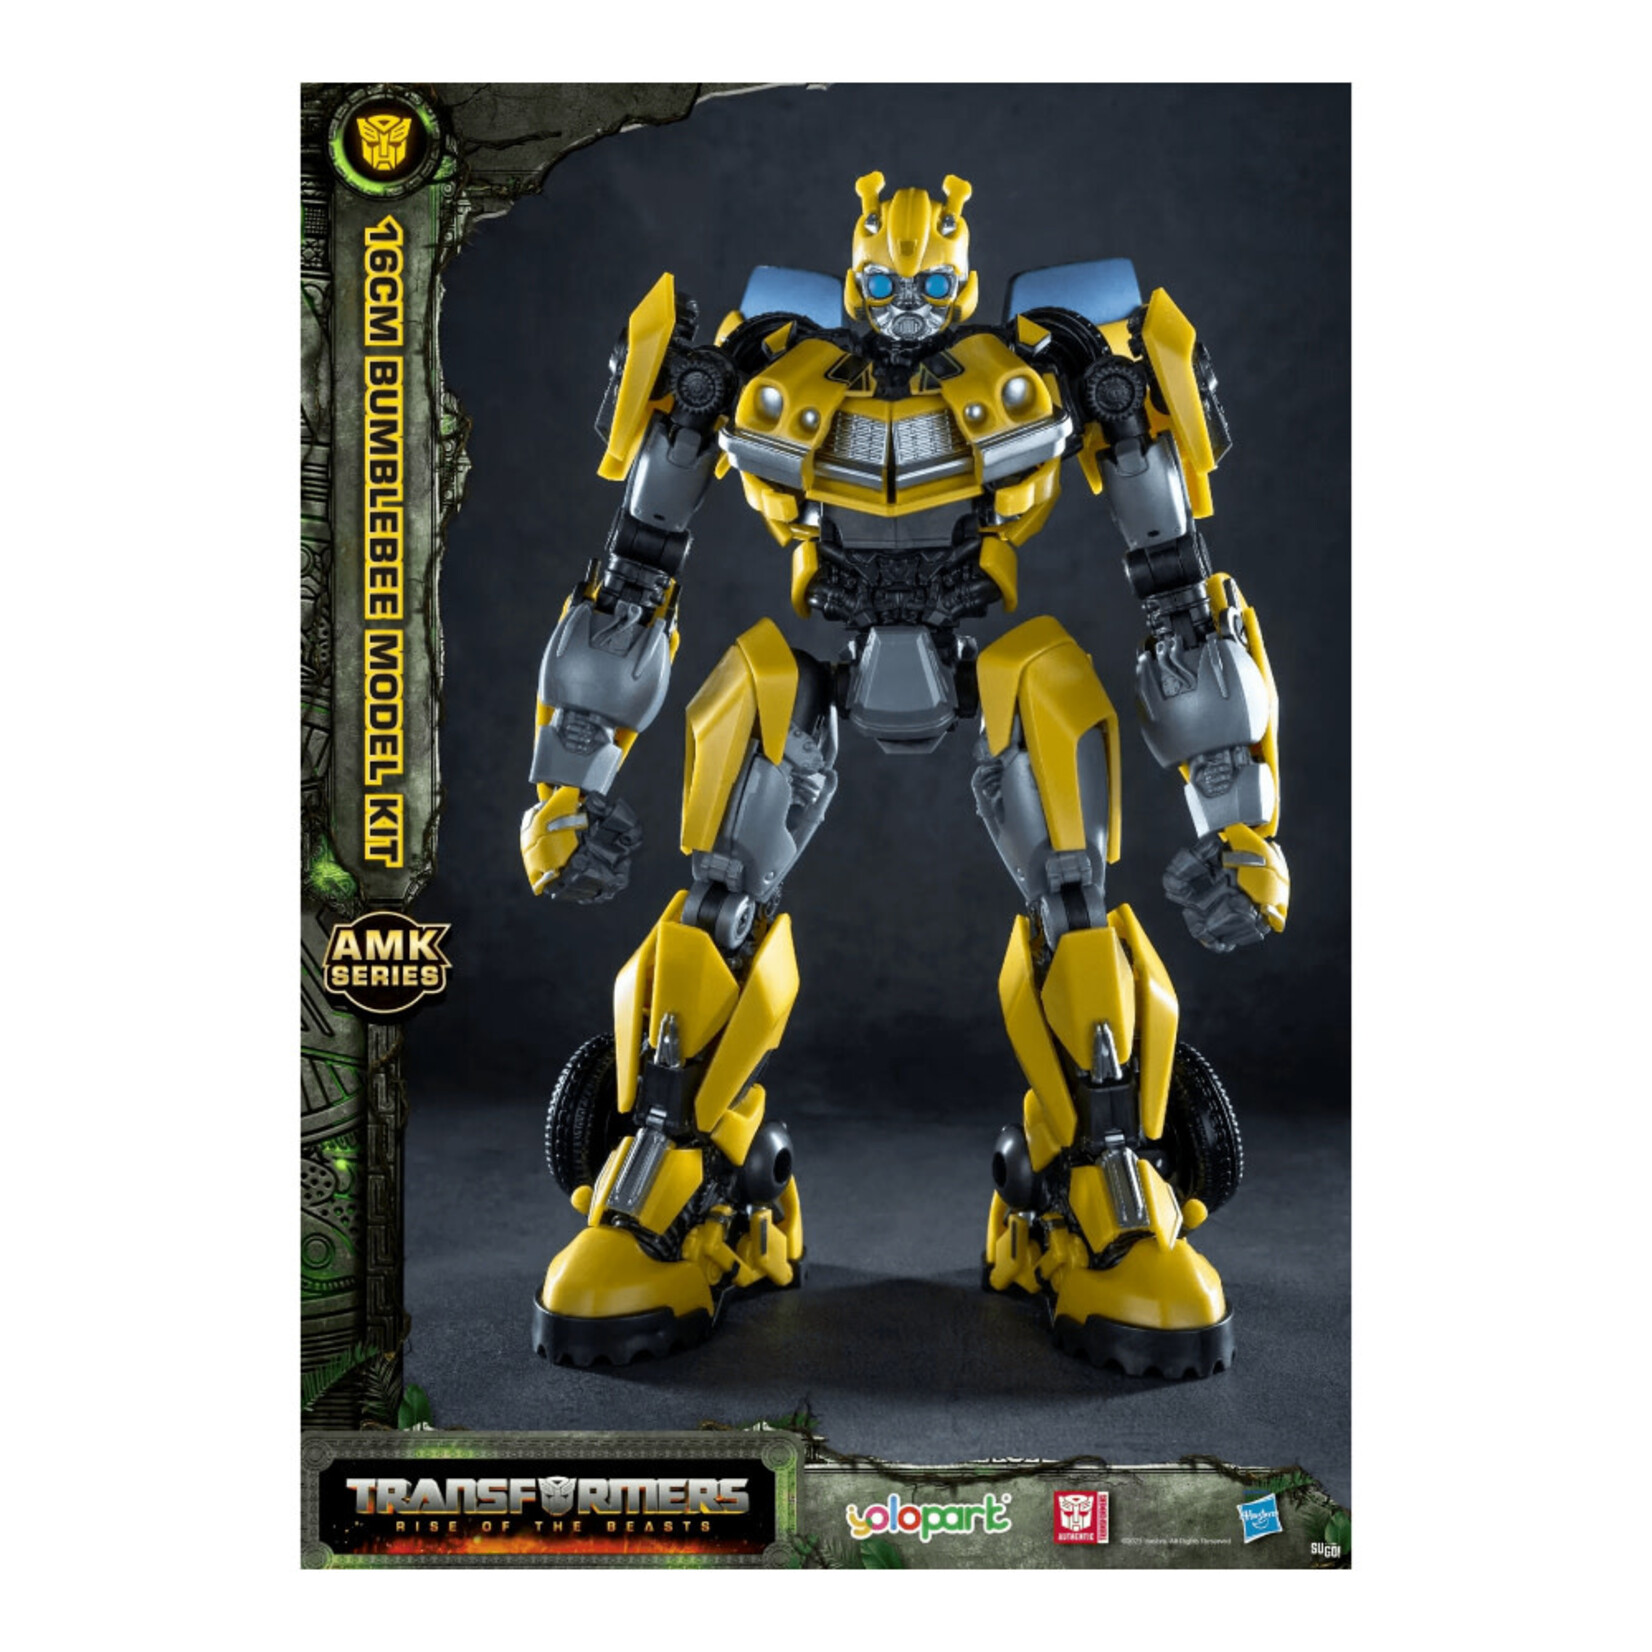 YOLOPART YOLOPART AMK SERIES TRANSFORMERS RISE OF THE BEASTS BUMBLEBEE